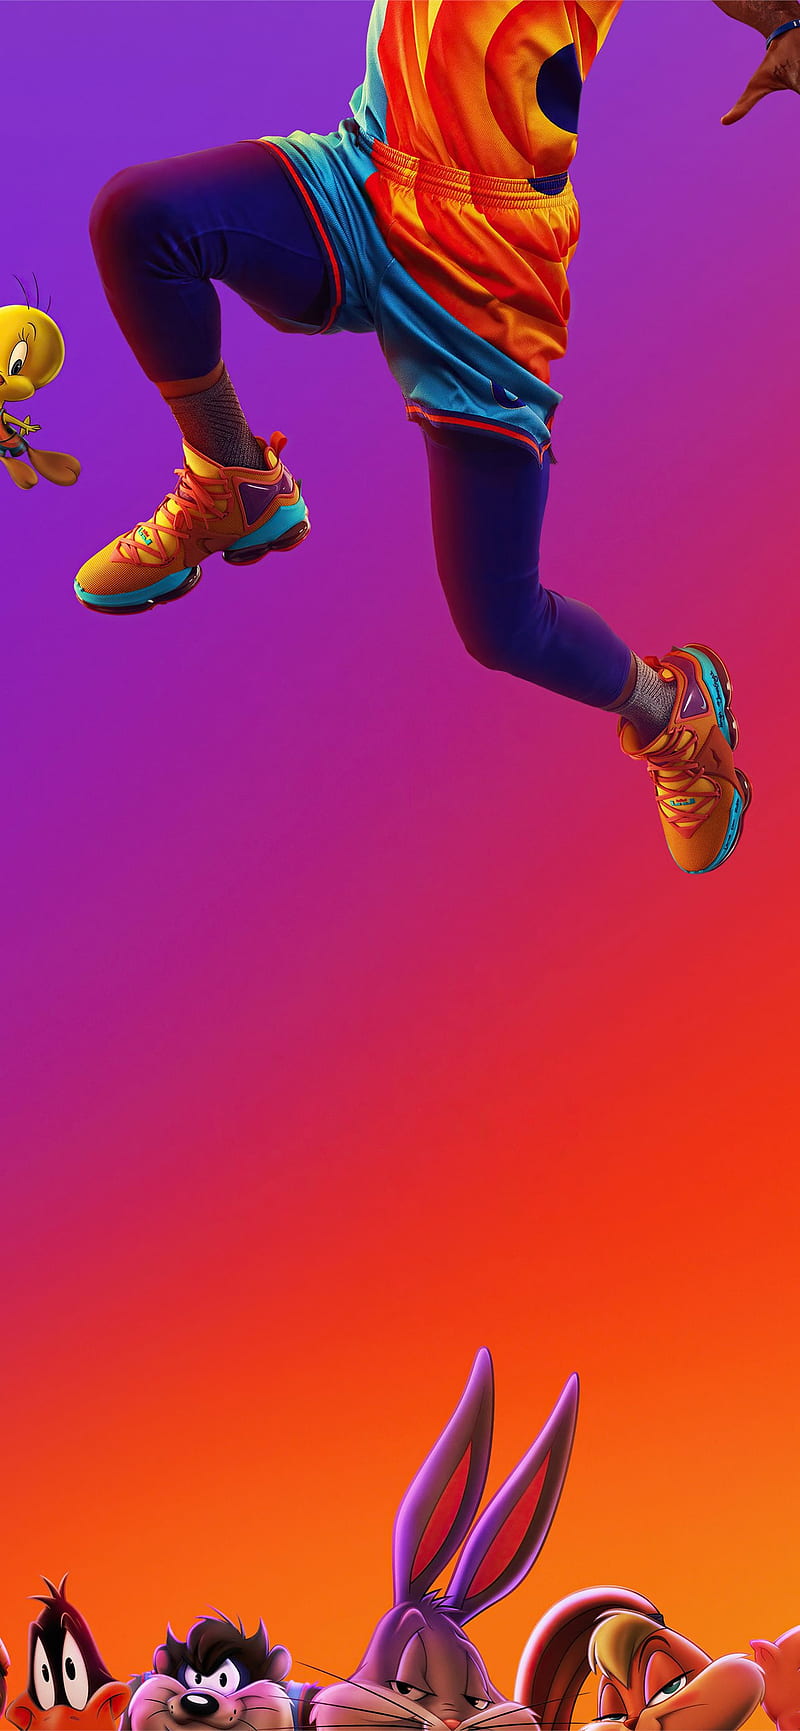 iPhone Space Jam Wallpapers Discover more basketball Film Lebron Lebron  James Movies wallpaper htt  Looney tunes wallpaper Space jam Looney  tunes space jam